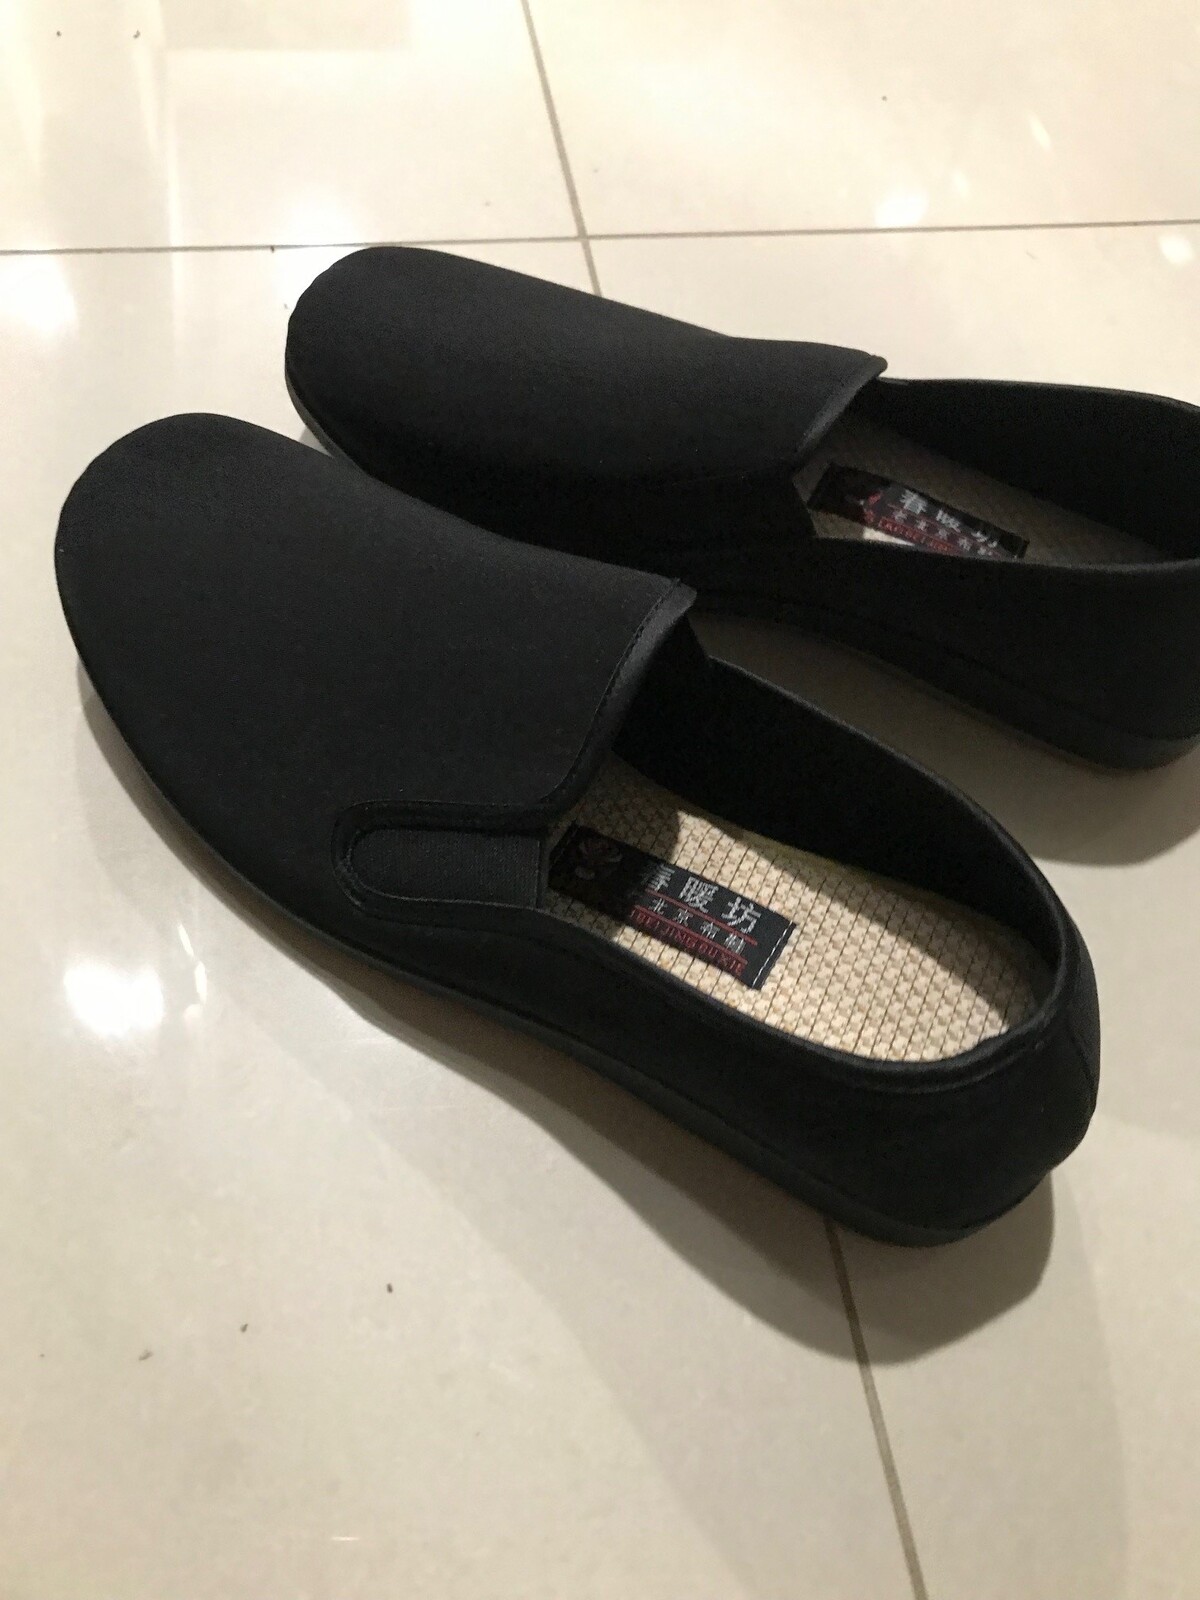 CSG Deluxe Kung Fu Slippers - 45 Europe